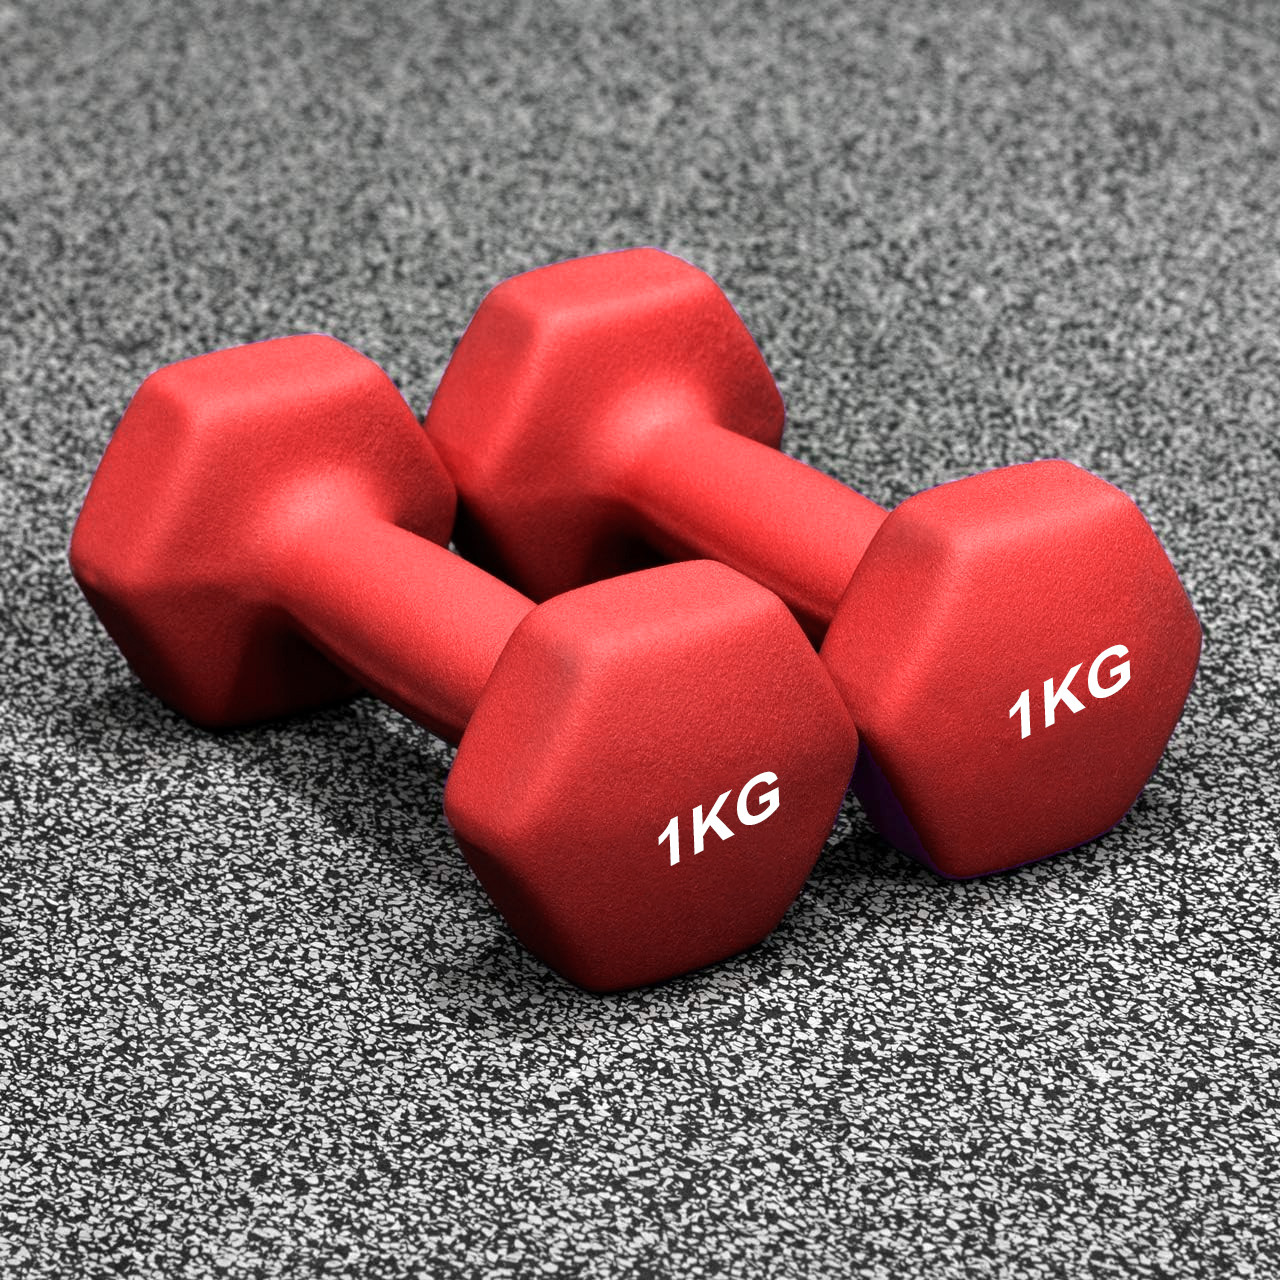 YALLA HomeGym Neoprene Dumbbells, Set of 6 Hand Weights for Men &amp; Women, Non-Slip Grip, Strength Training Free Weights for Home Gym